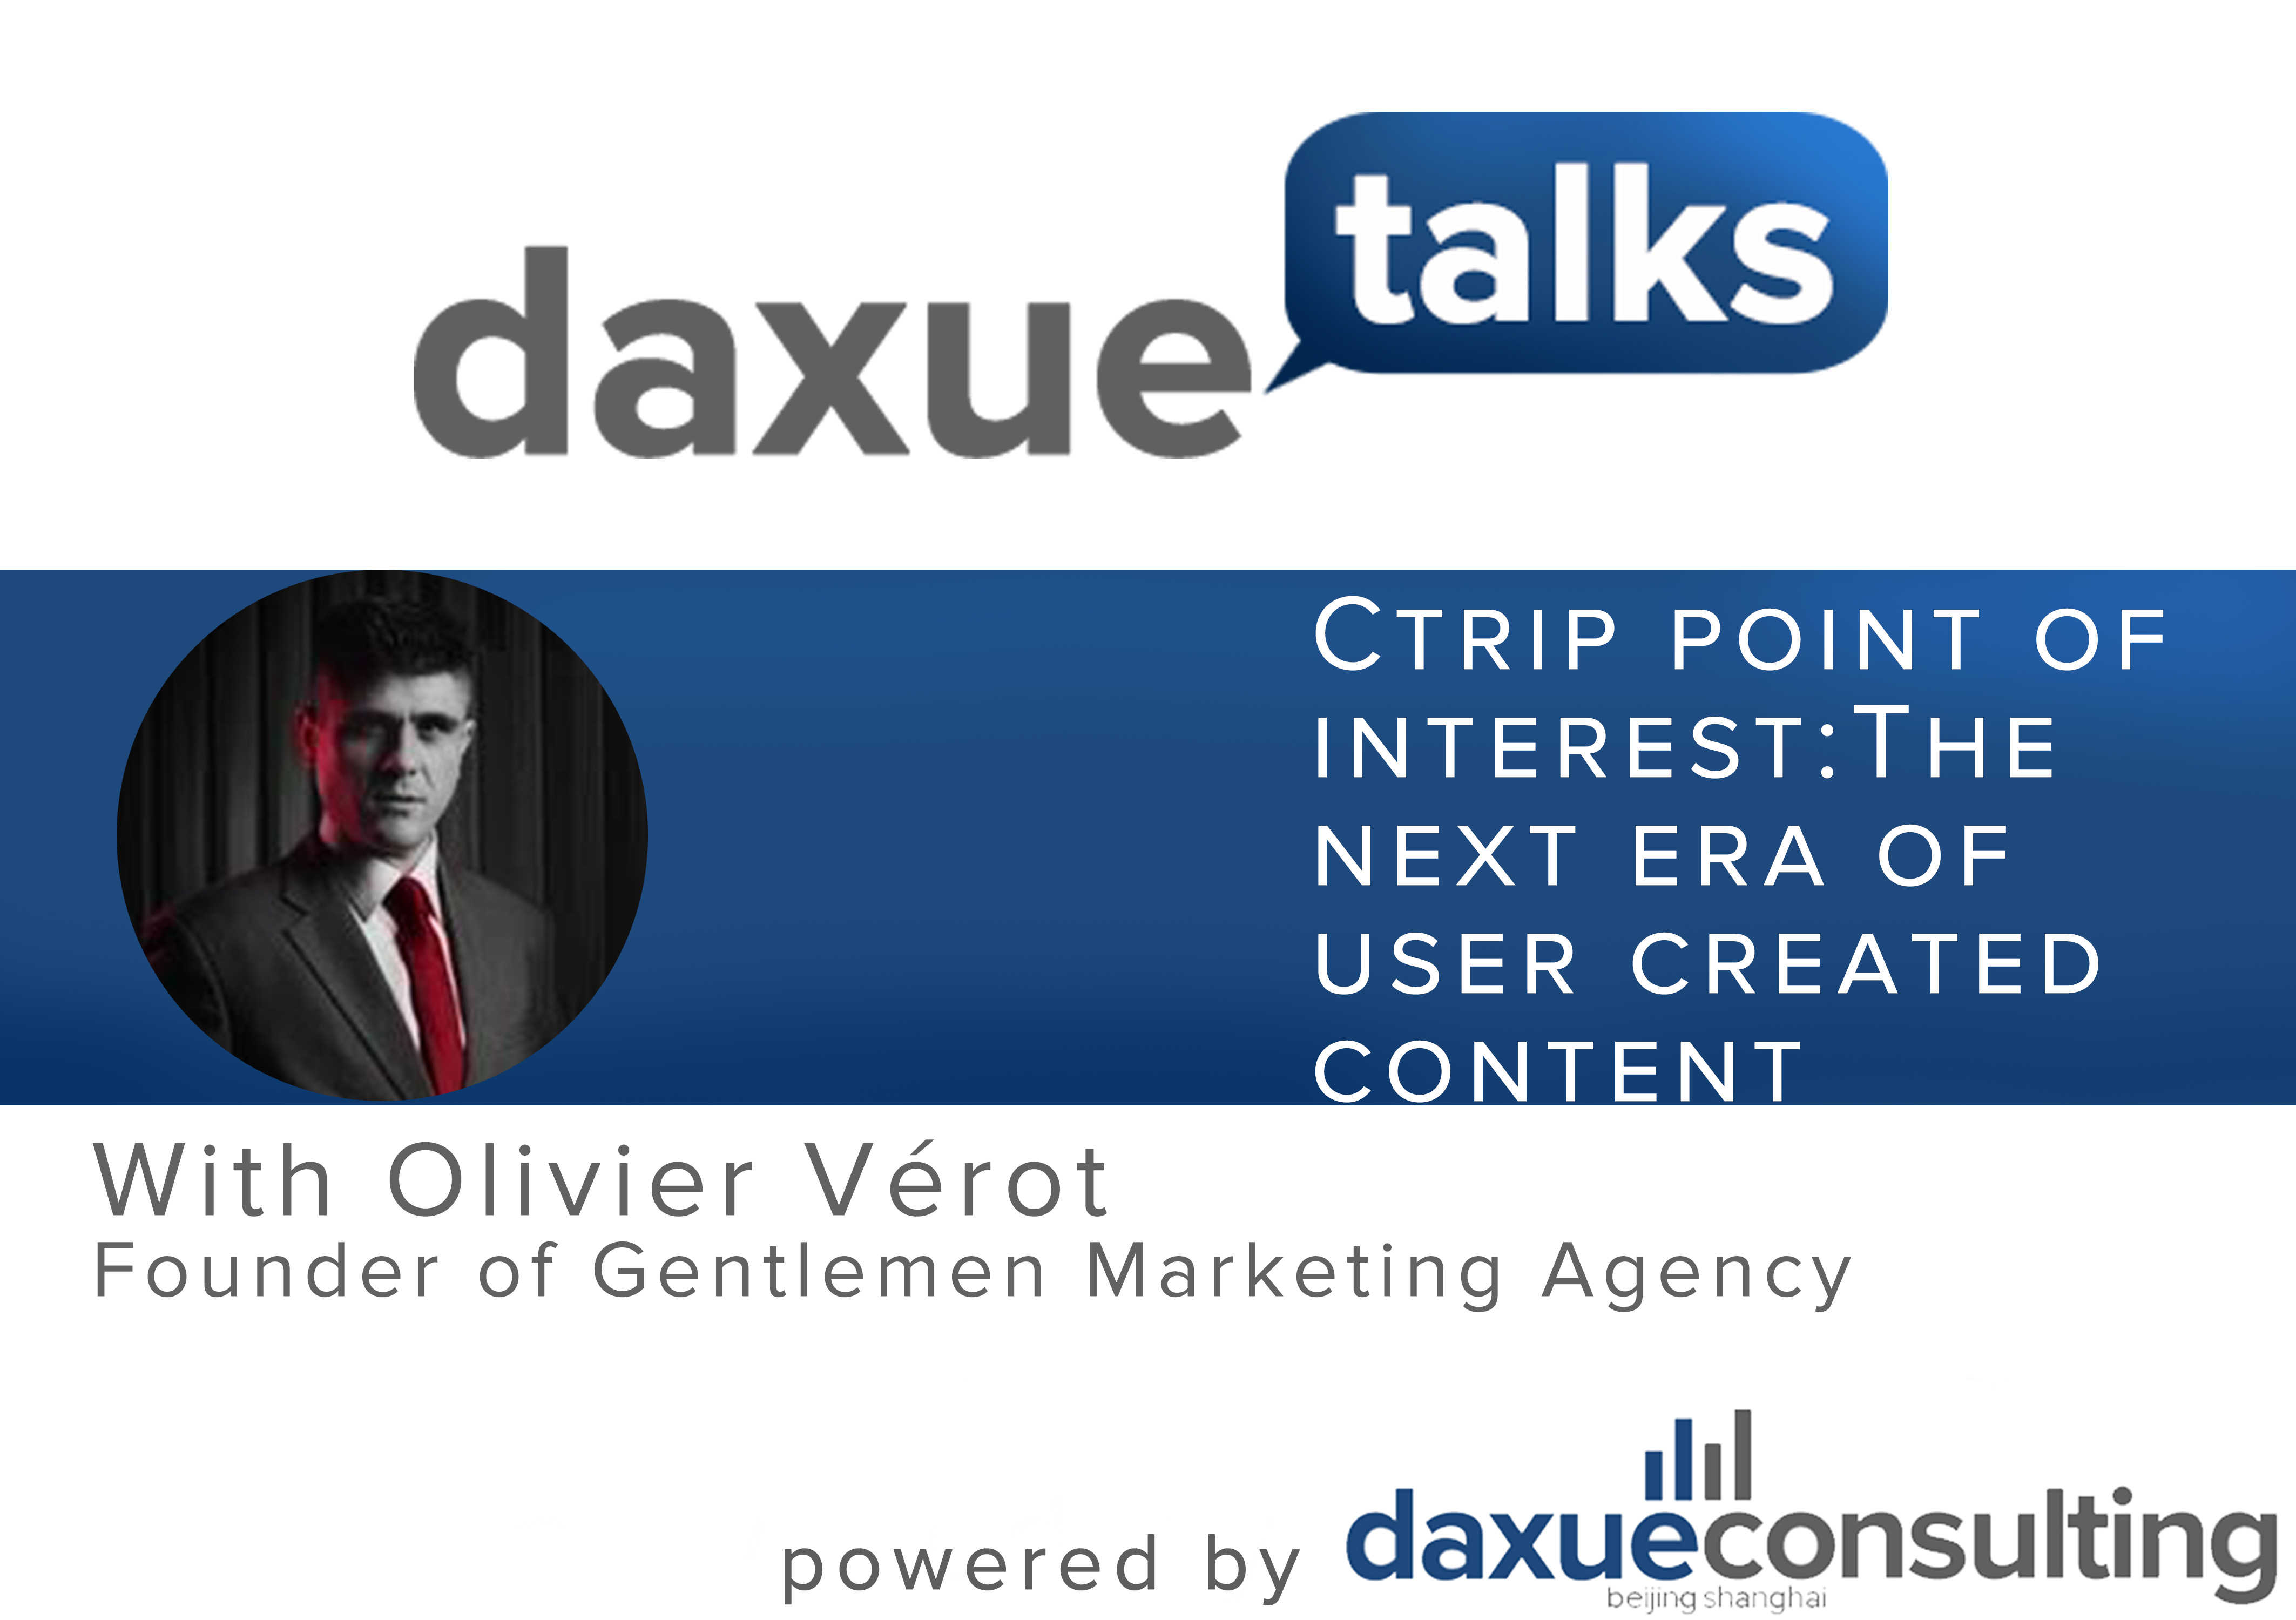 Daxue Talks 31: Ctrip point of interest: The next era of user created content